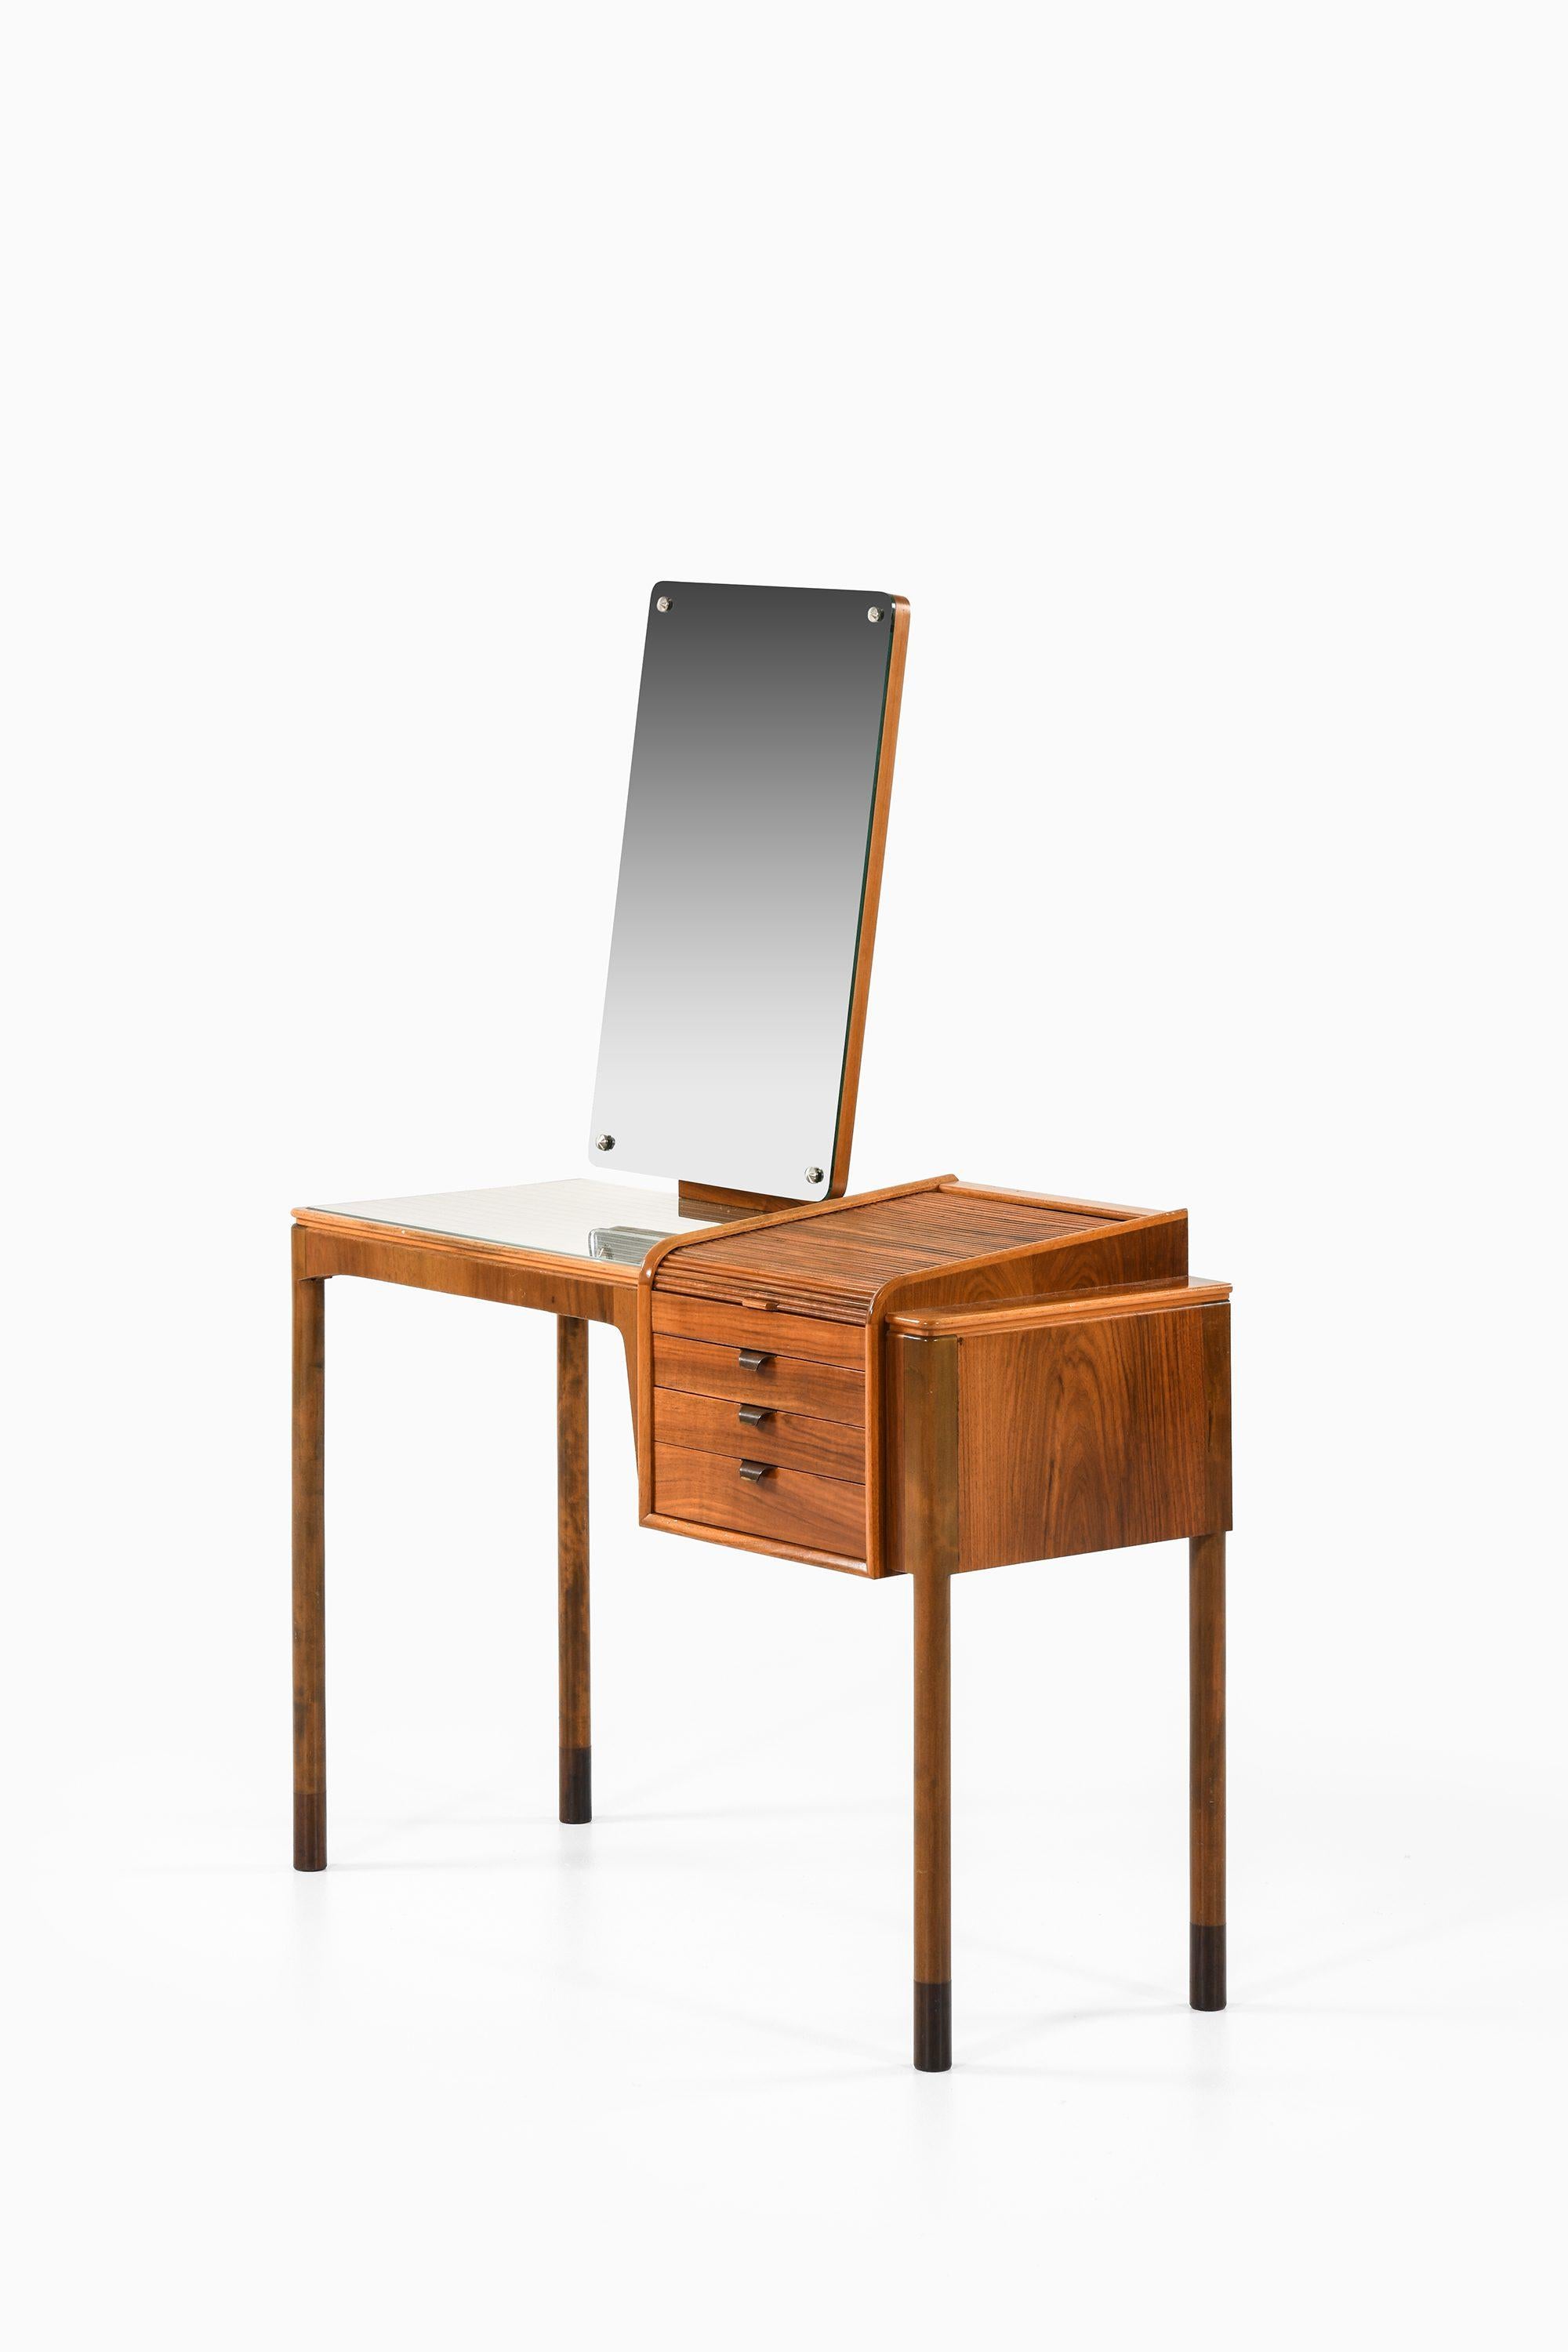 Scandinavian Modern Vanity in Walnut, Glass and Brass Attributed to Carl-Axel Acking, 1940's For Sale